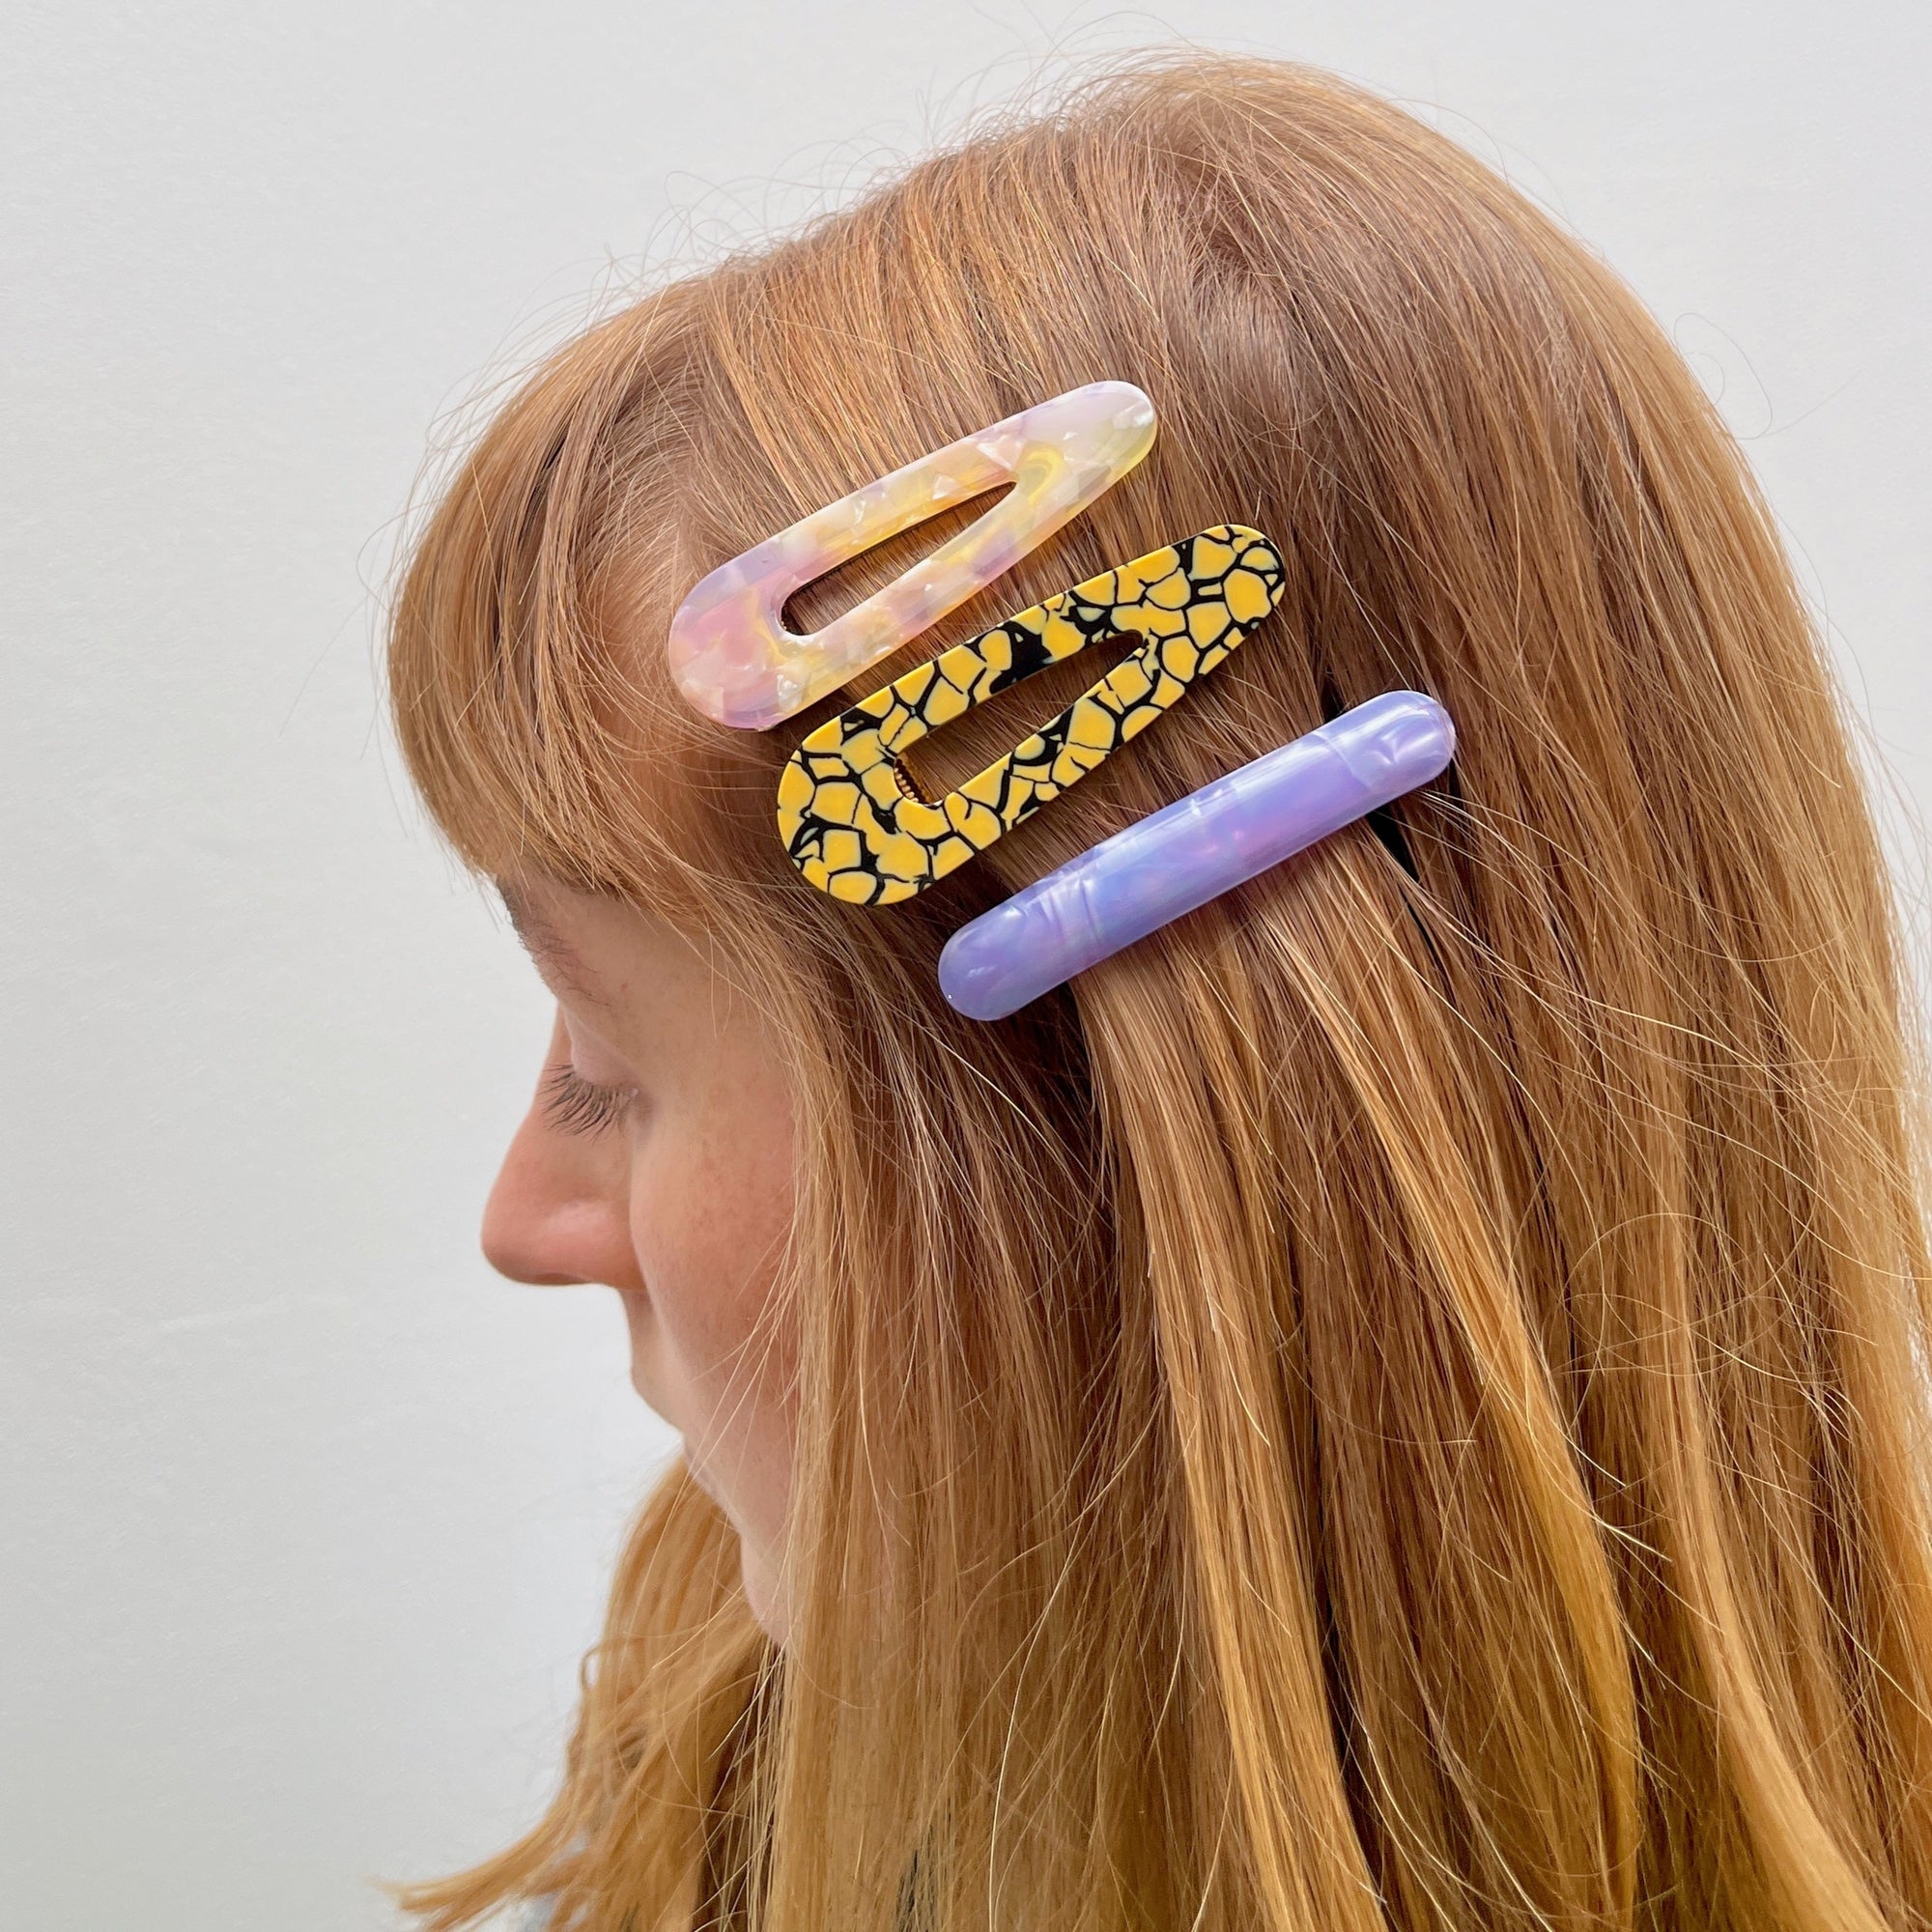 Meet CORA!  Our OG clip, a rounded-edge barrette featuring a gold hinge fastening and a teeth effect grip for a sturdy and reliable hold. Great for keeping hair in place or simply clipping back your grown out fringe.  Each clip comes in a branded Tort pouch (colours change seasonally).  Size: 7cm  Colour: yellow and black mosaic effect  Material: eco-resin